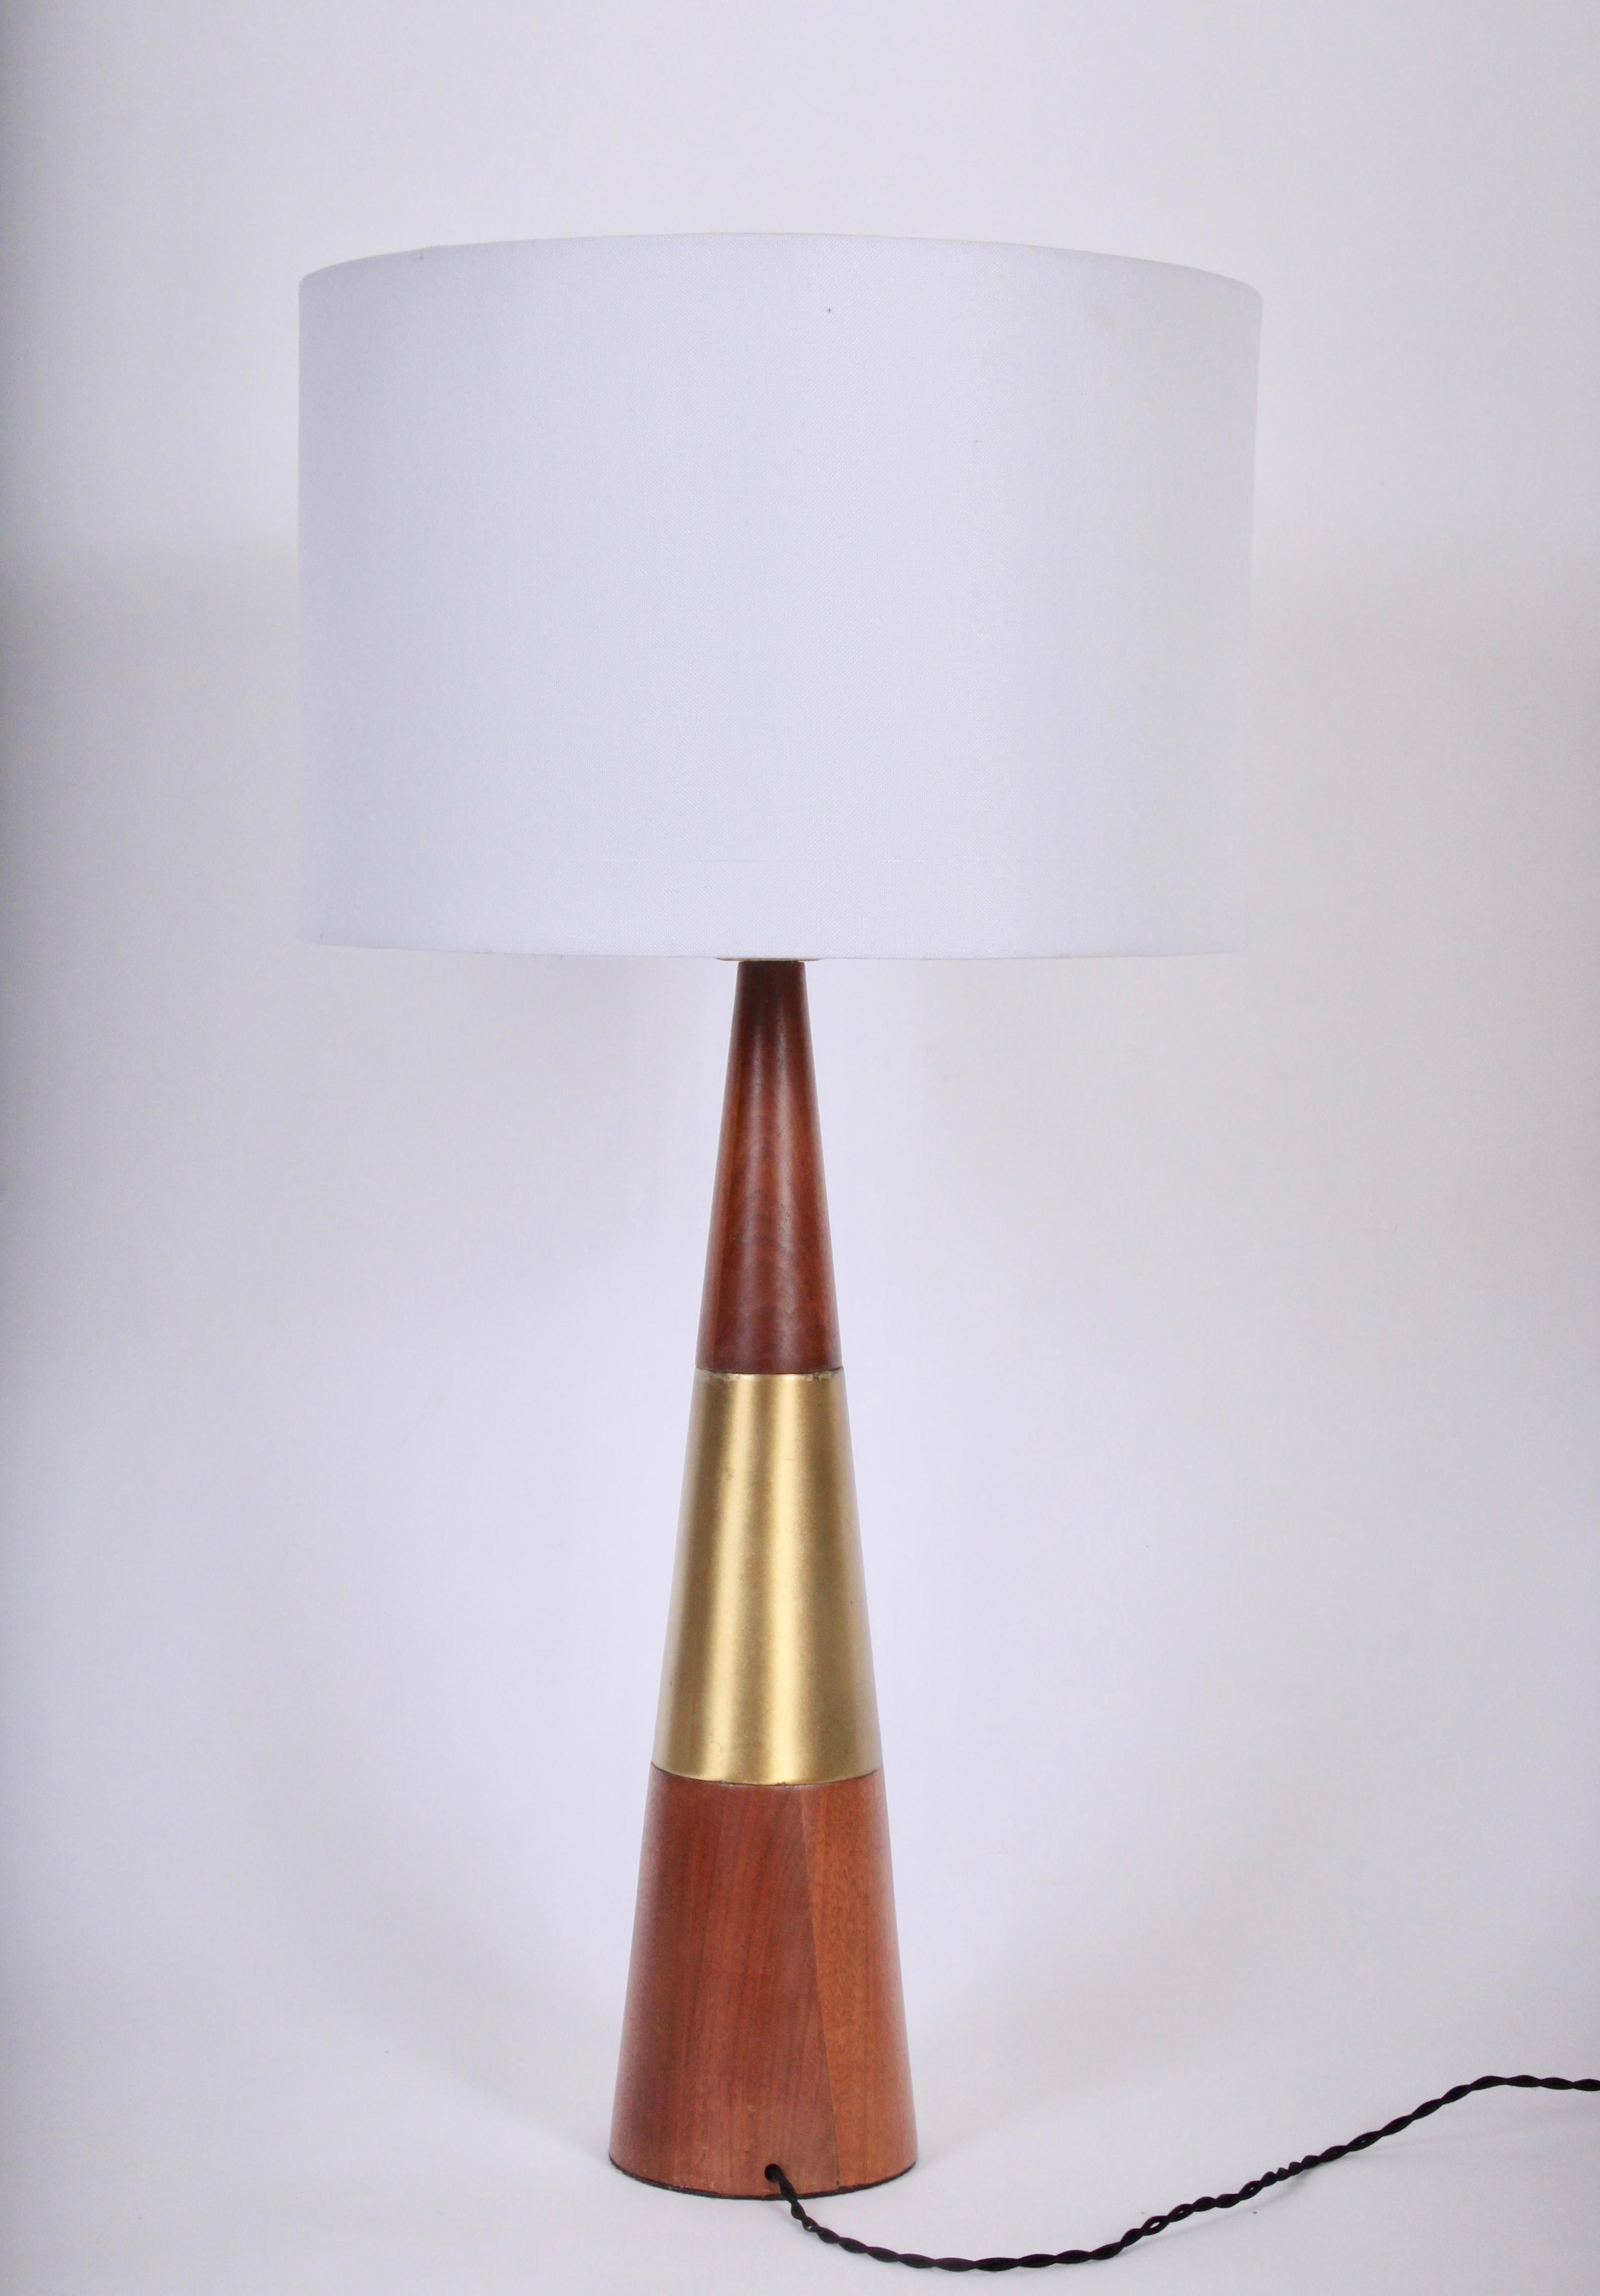 Tony Paul for Westwood Industries Cone Table Lamp in Swedish Brass & Solid Walnut. Circa 1960.  Featuring a sleek conical form in walnut and reflective bright brass. 21H to top of socket. Small footprint. Shade shown for display only and not for